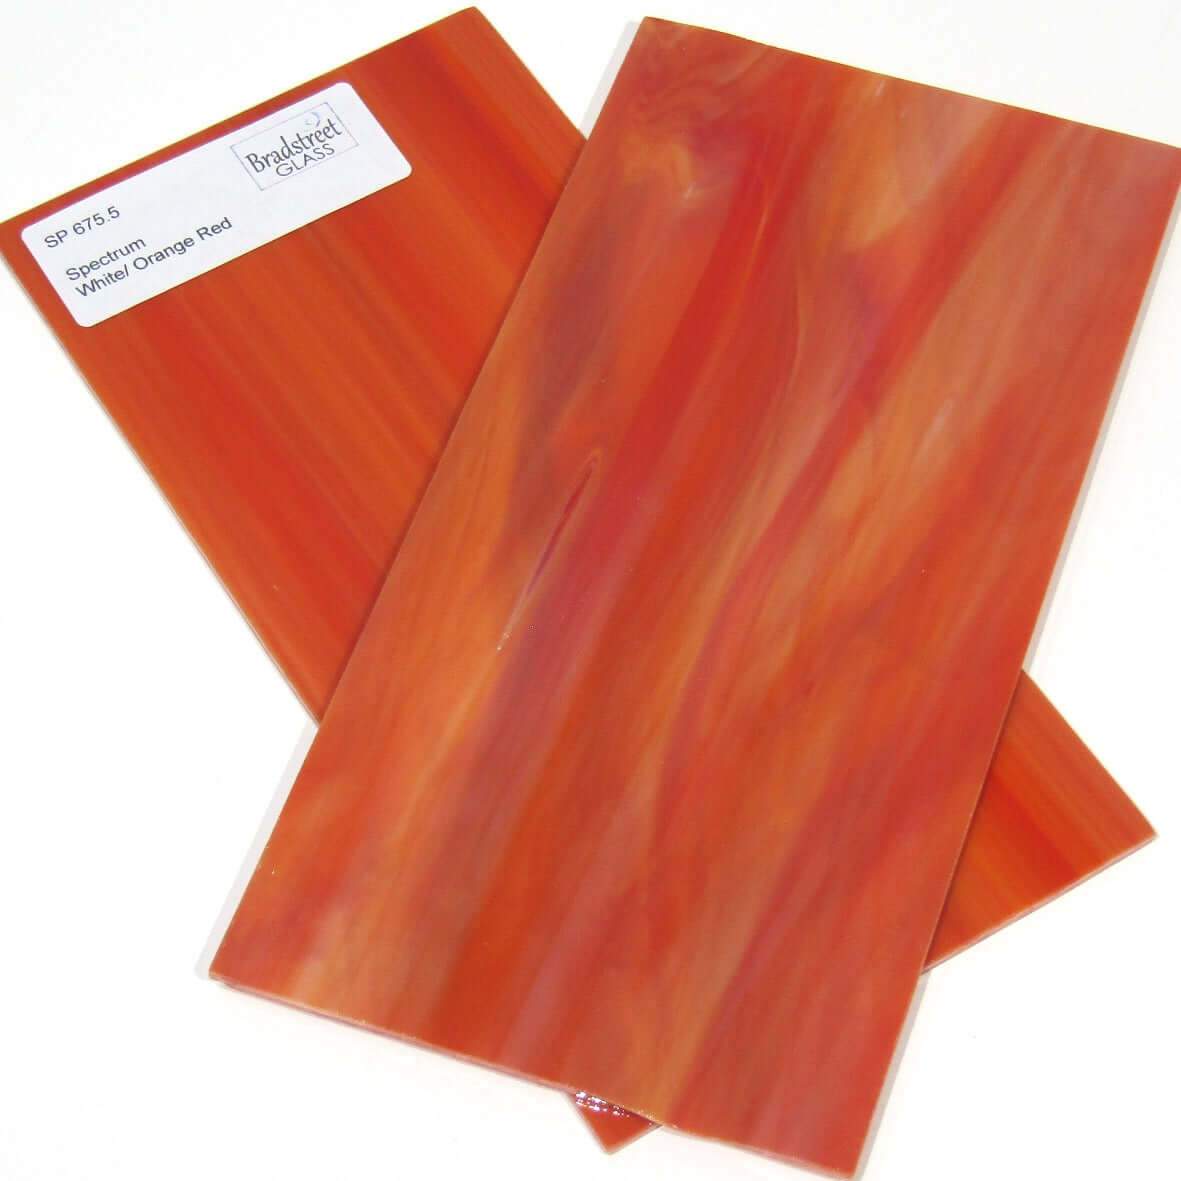 Spectrum SP 675.5 Stained Glass Sample, White Orange Red Opal, Streaky Swirled Opaque